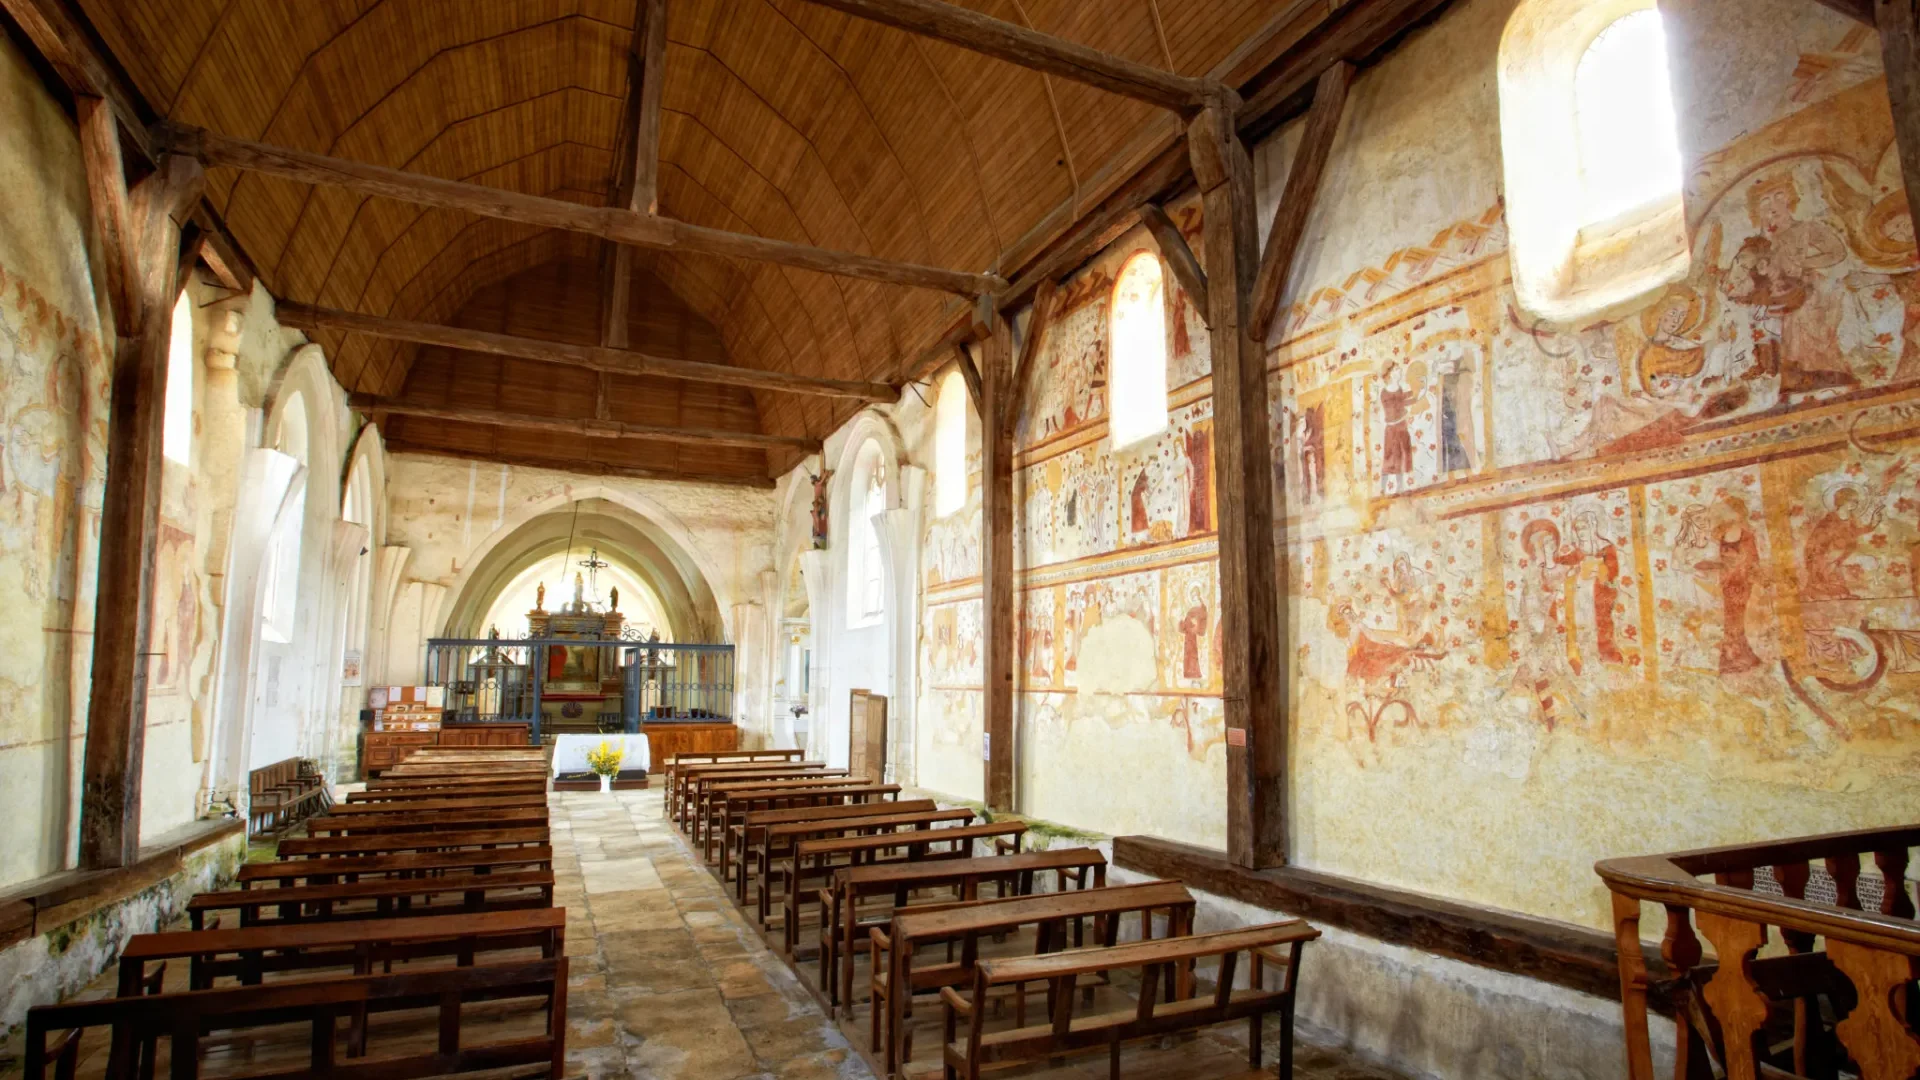 Mural paintings of the church of Moutiers-en-Puisaye